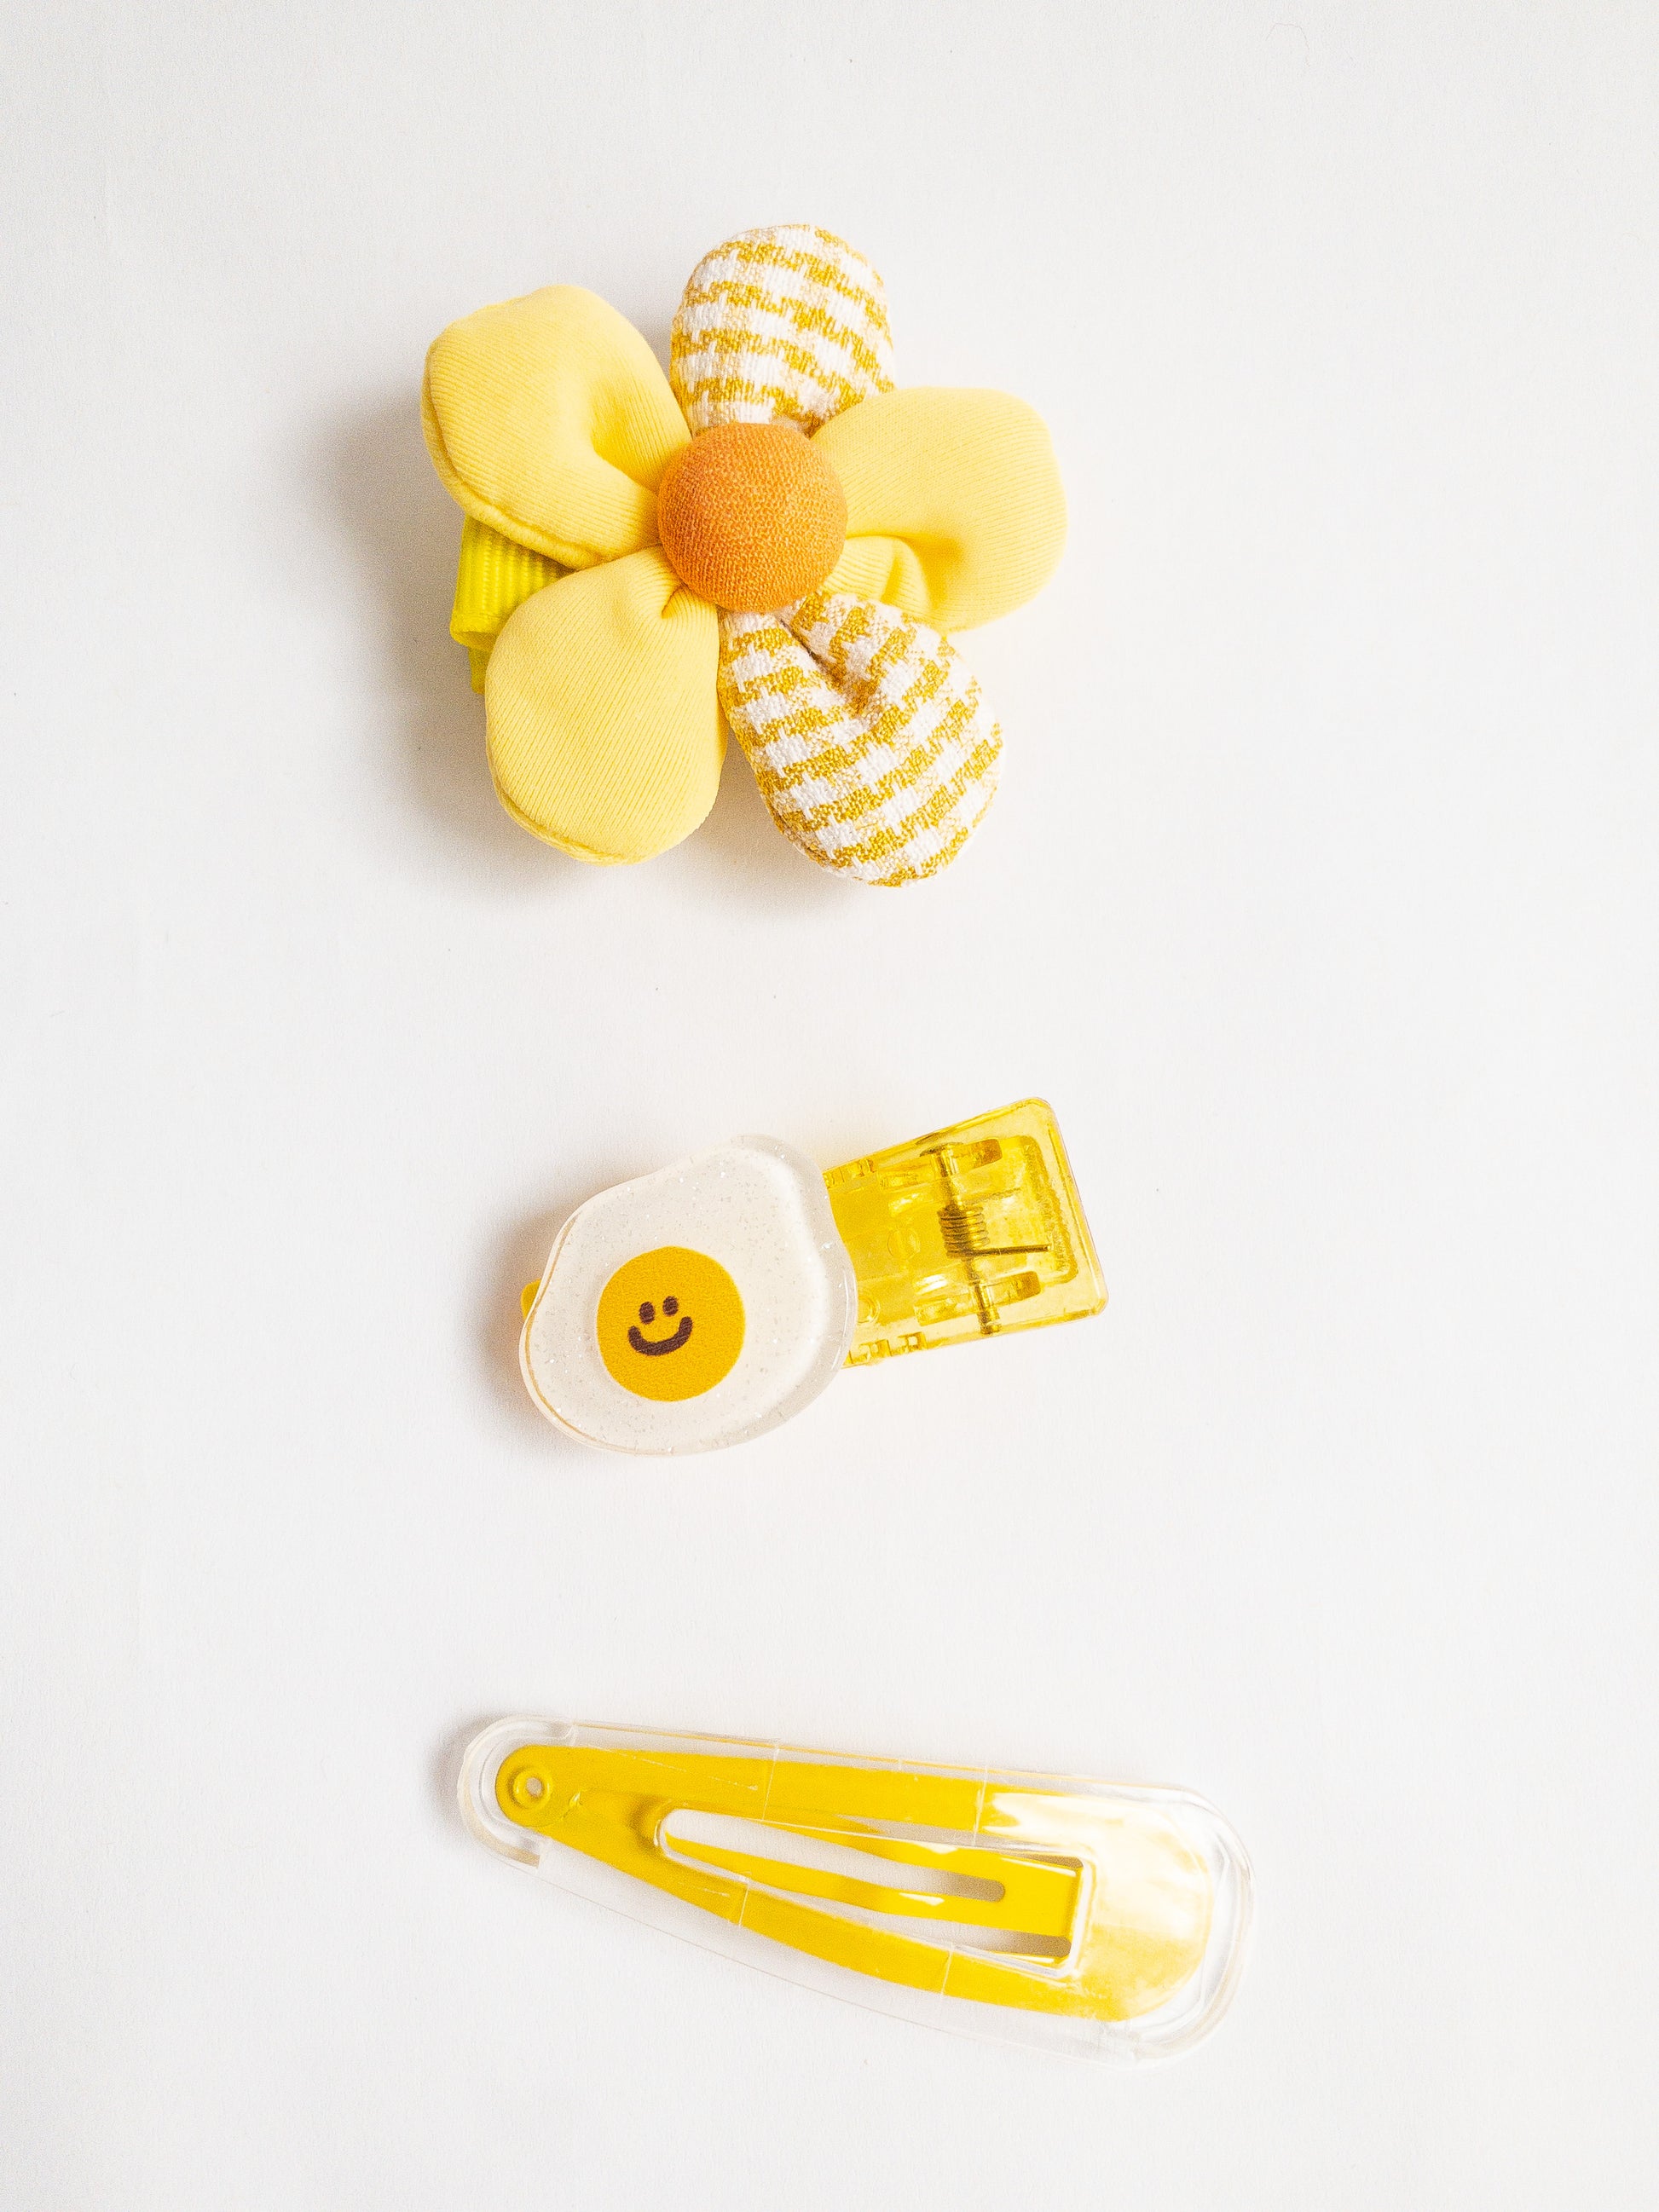 Take your hair from blah to yum with this 3-piece Happy Eggy hair clip set! Adorably decorated with a glitter fried egg, a fabric flower, and a clear/yellow snap clip. 